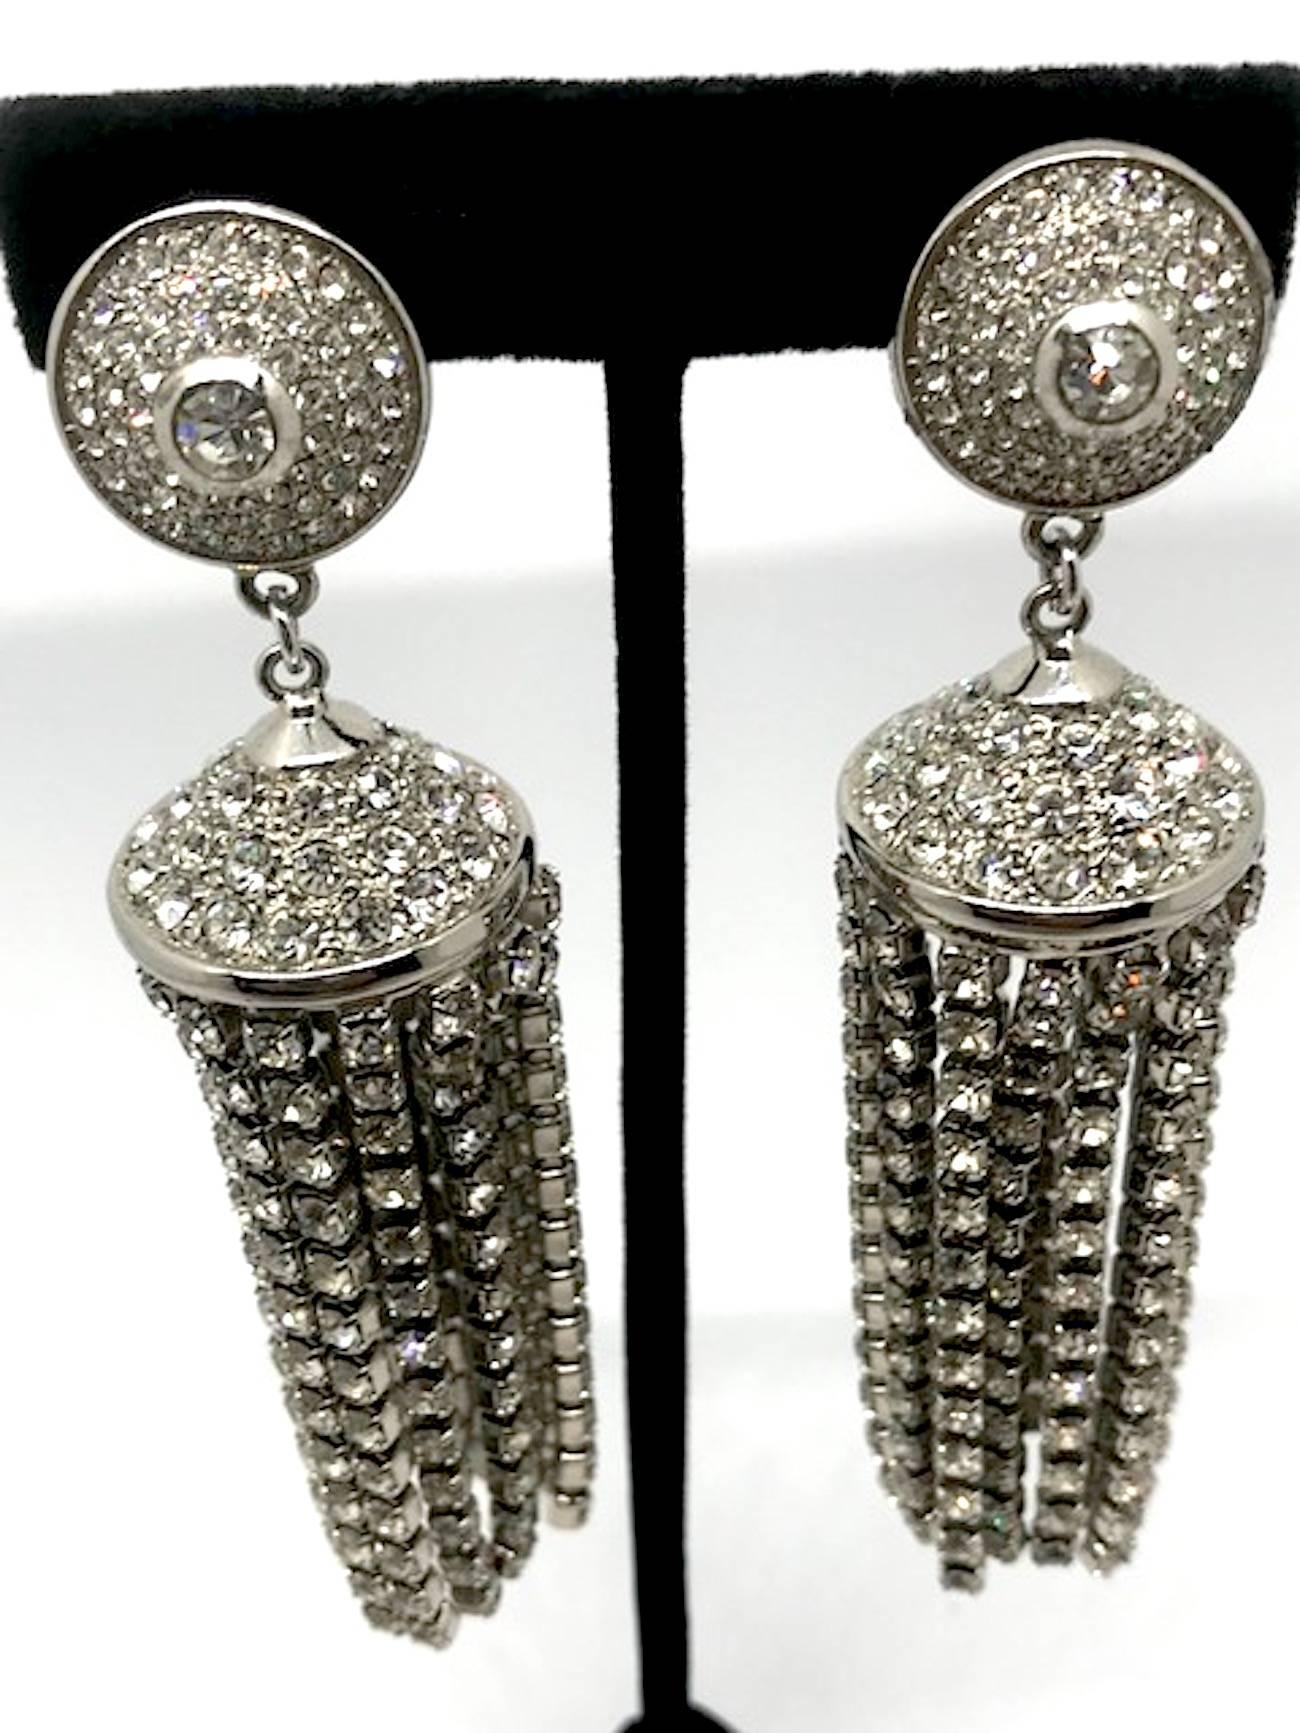 These show stopper earrings are from the personal collection of fine and costume jewelry of Italian actress Elsa Martinelli. Many of her pieces are by the fifty year old Italian jewelry company De Liguoro and designed by Gianni De Liguoro. Each